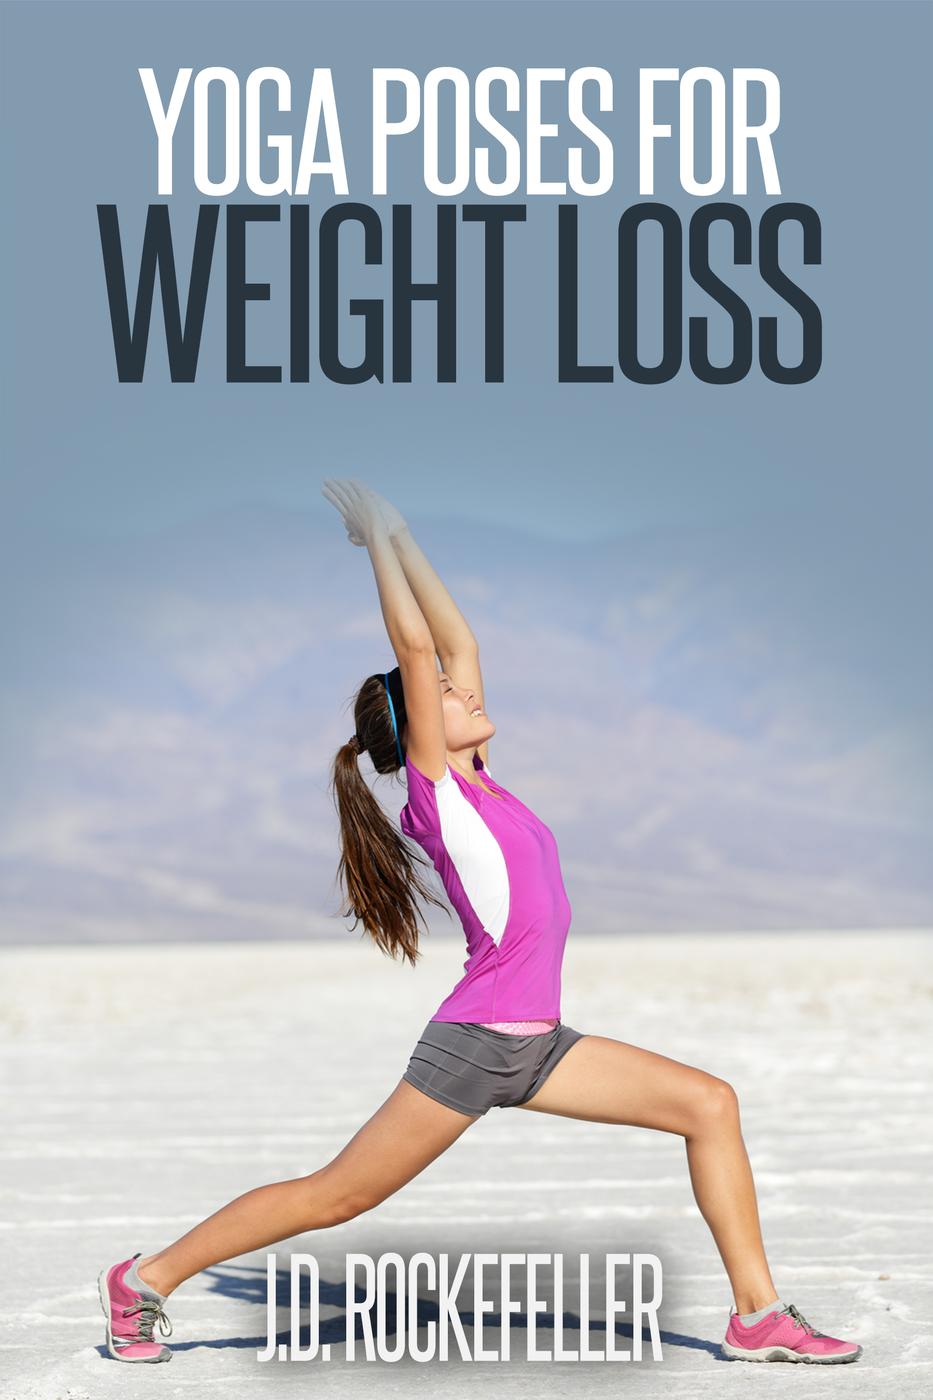 download yoga poses for weight loss by jd rockefeller softarchive